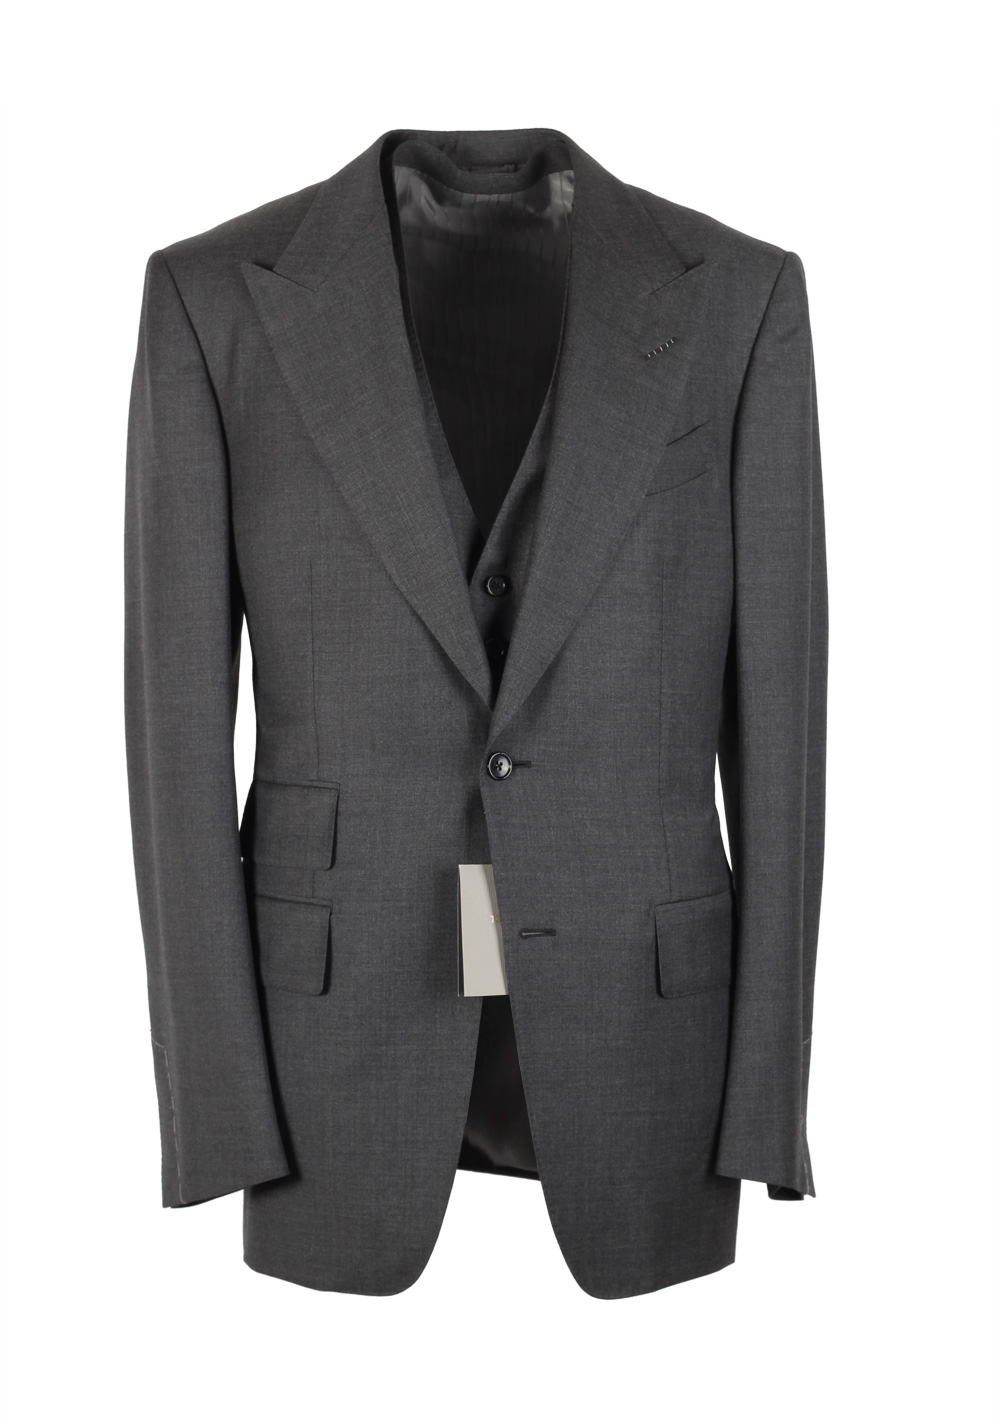 TOM FORD Windsor Gray 3 Piece Suit Size 48L / 38L U.S. Wool Fit A ...